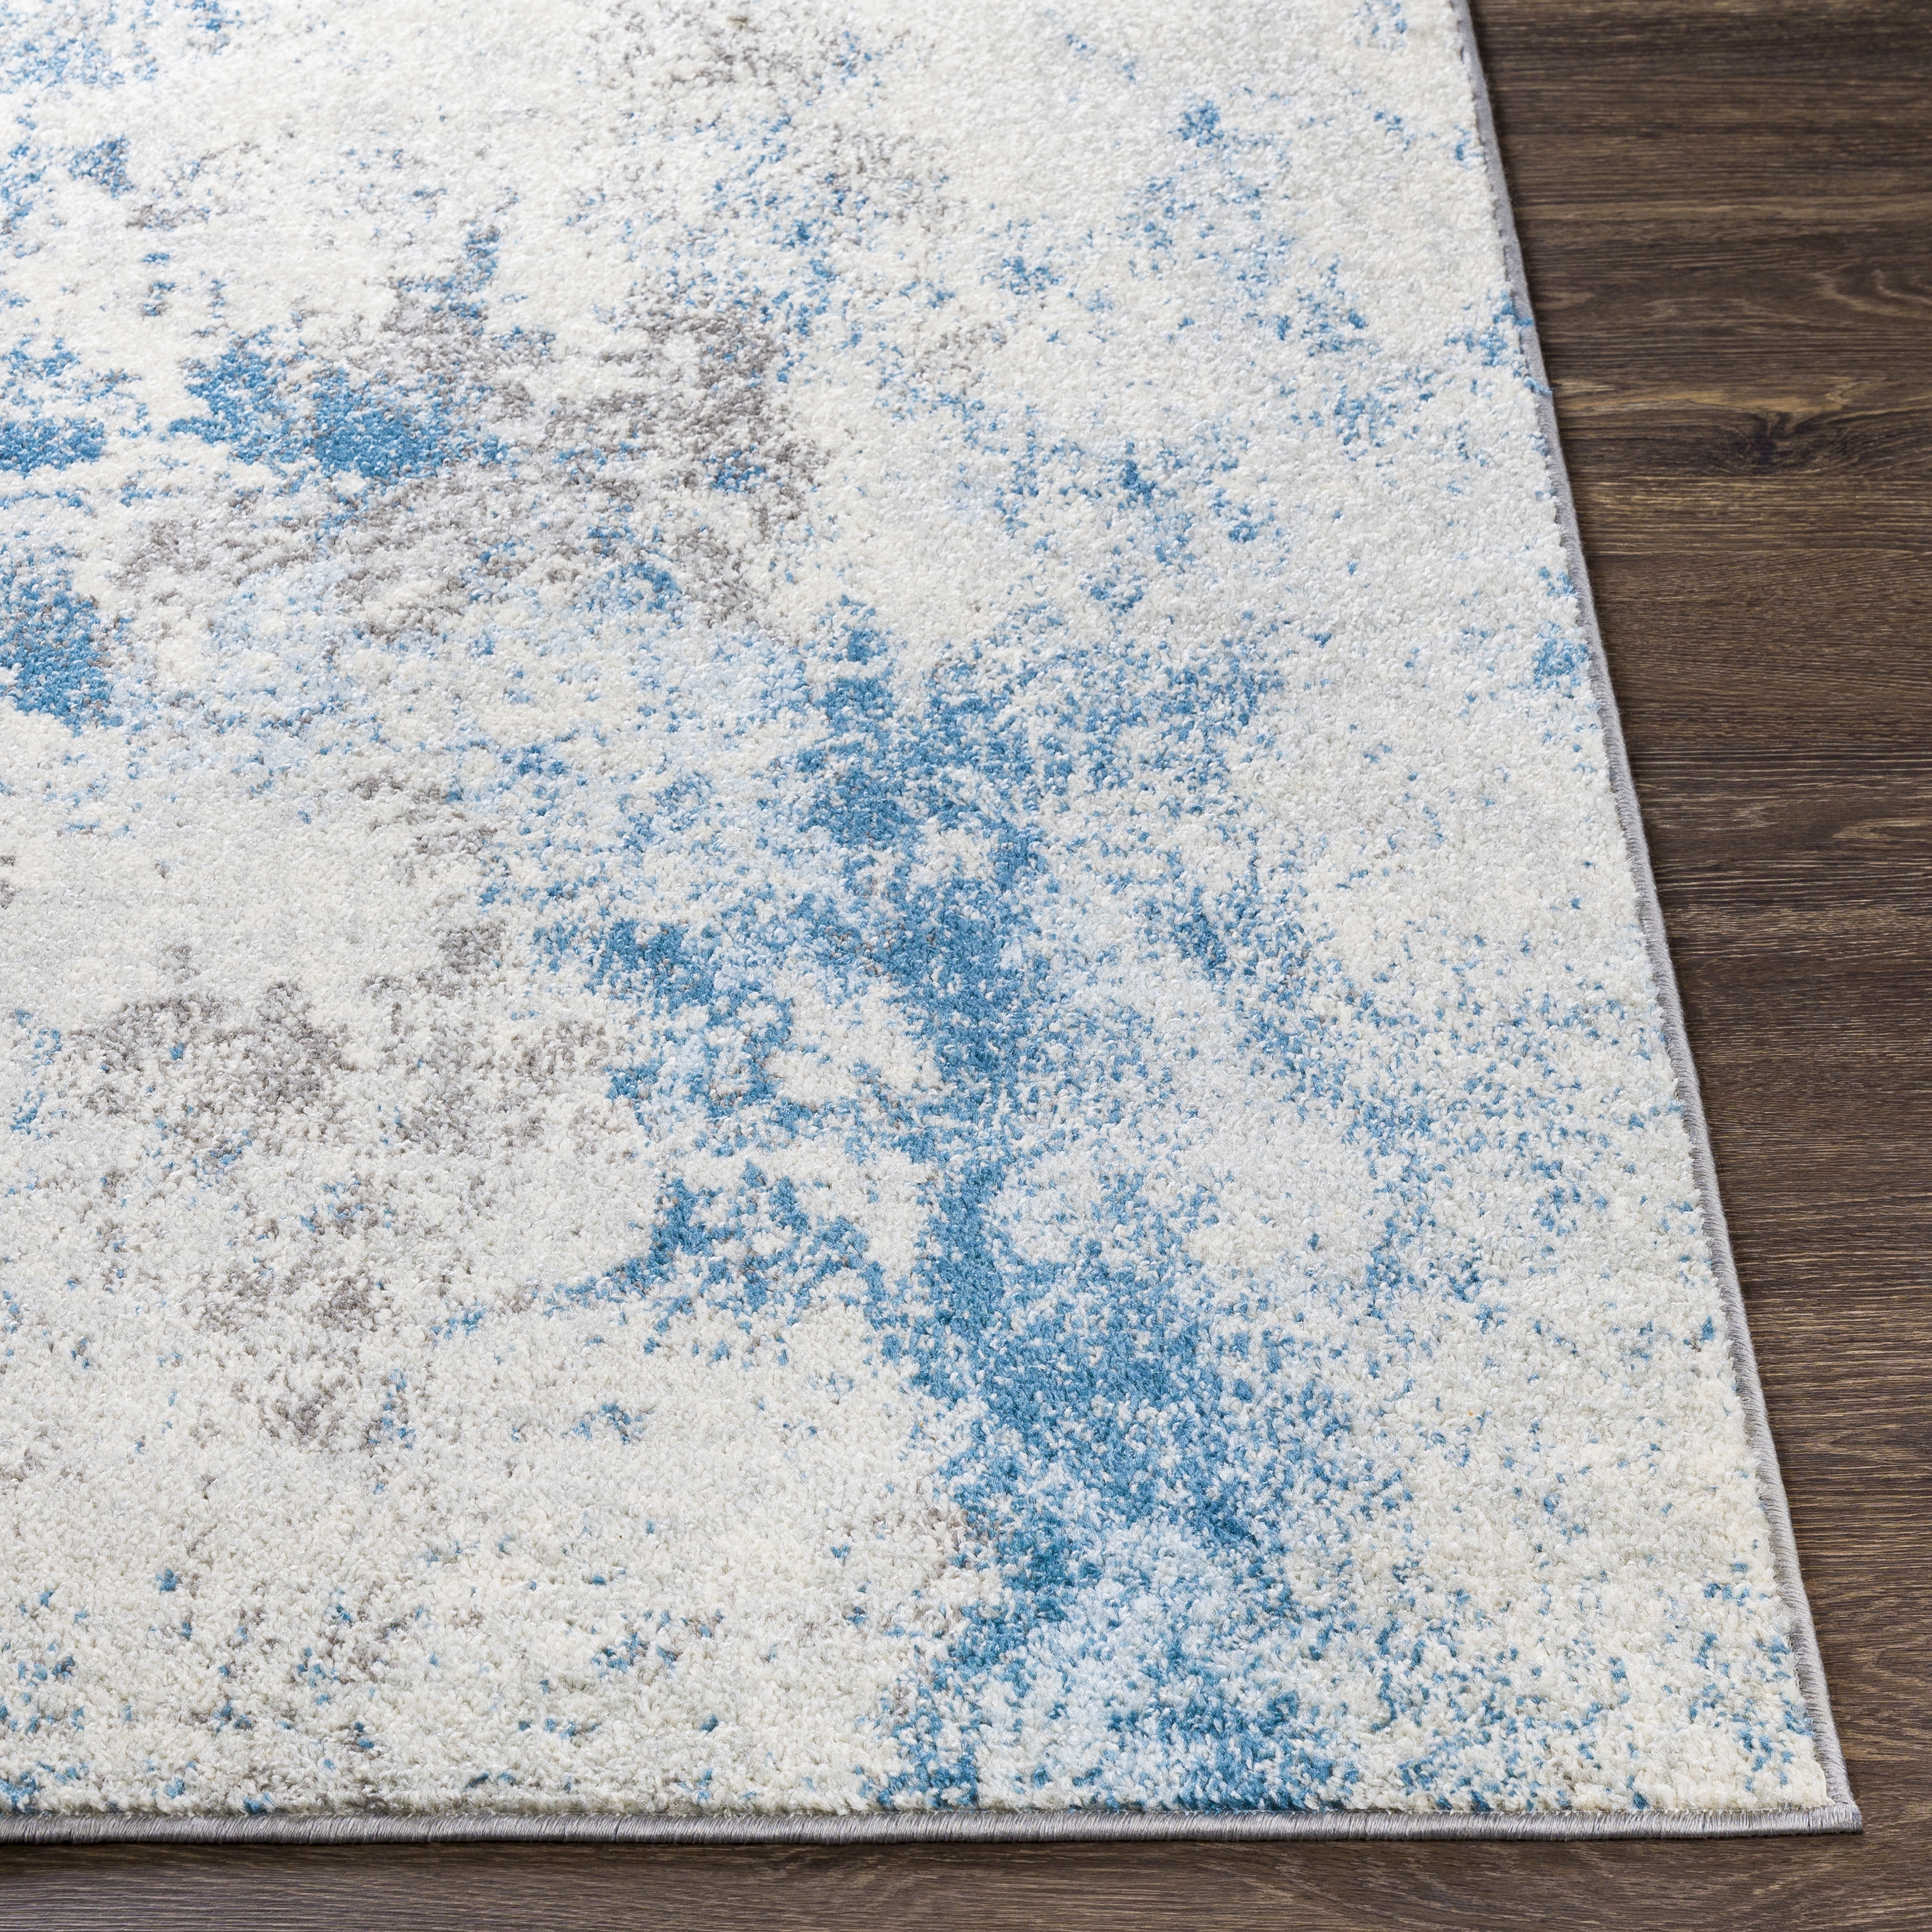 Chester Rug, 5'3" x 7'3" - Image 1